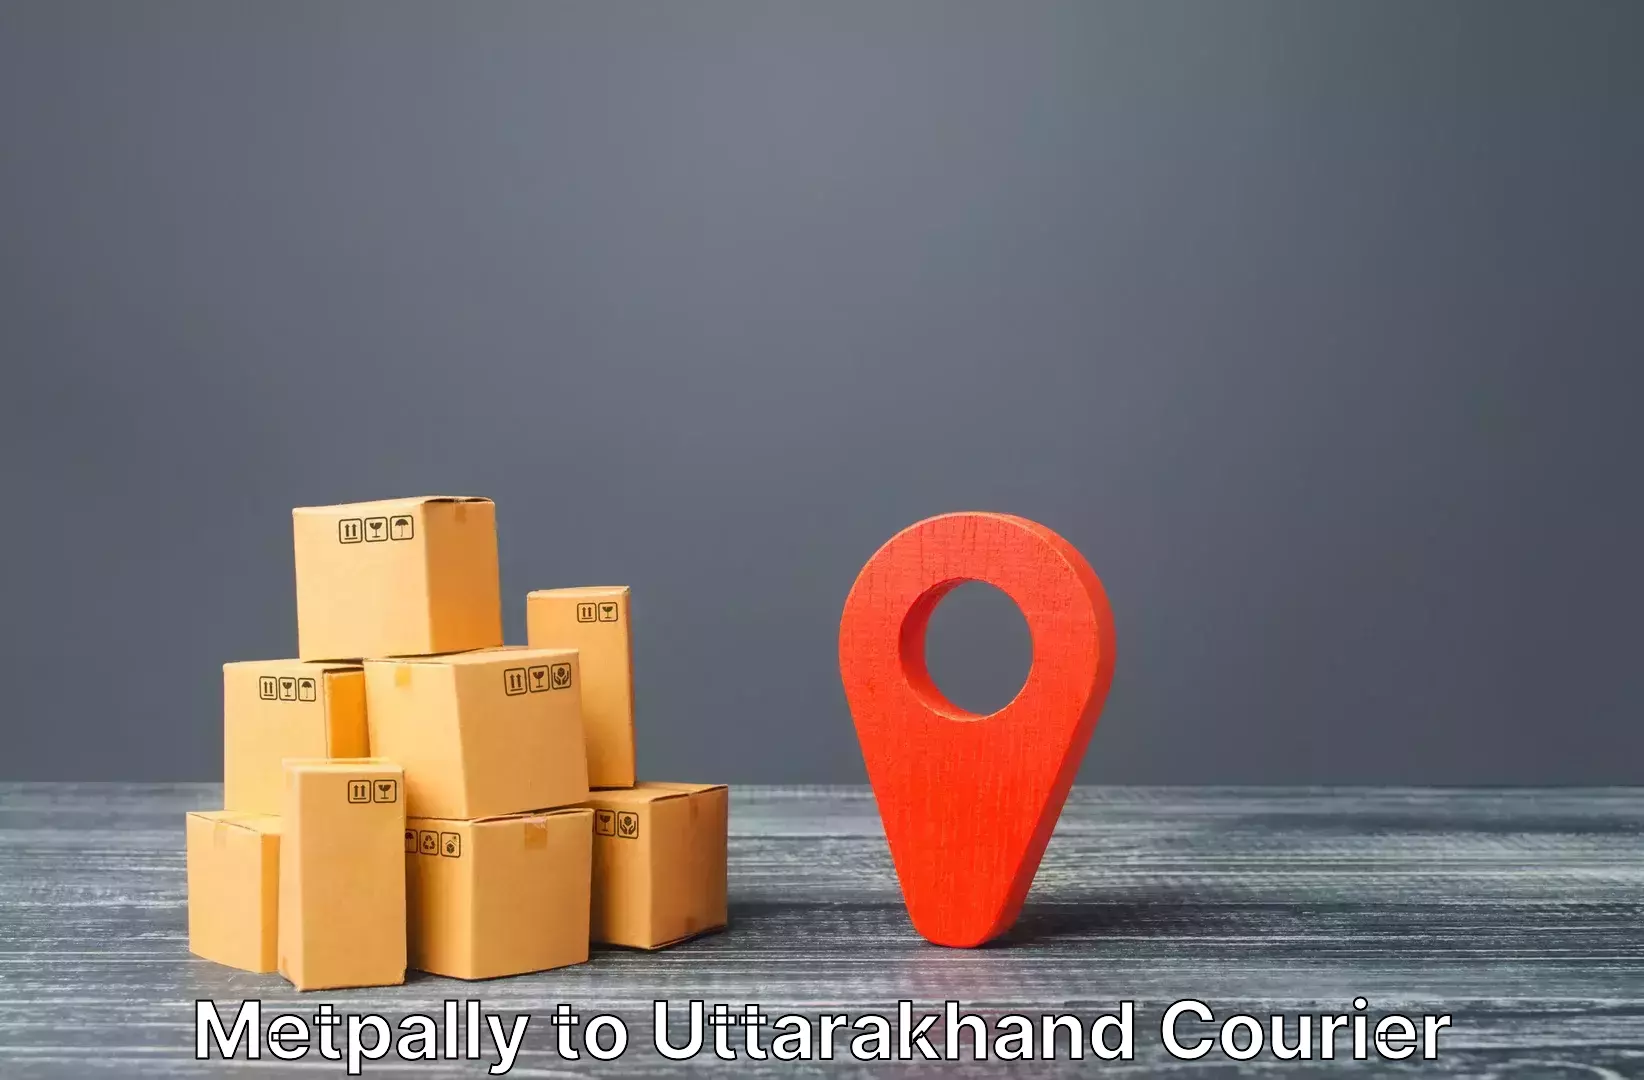 Luggage delivery news Metpally to Uttarakhand